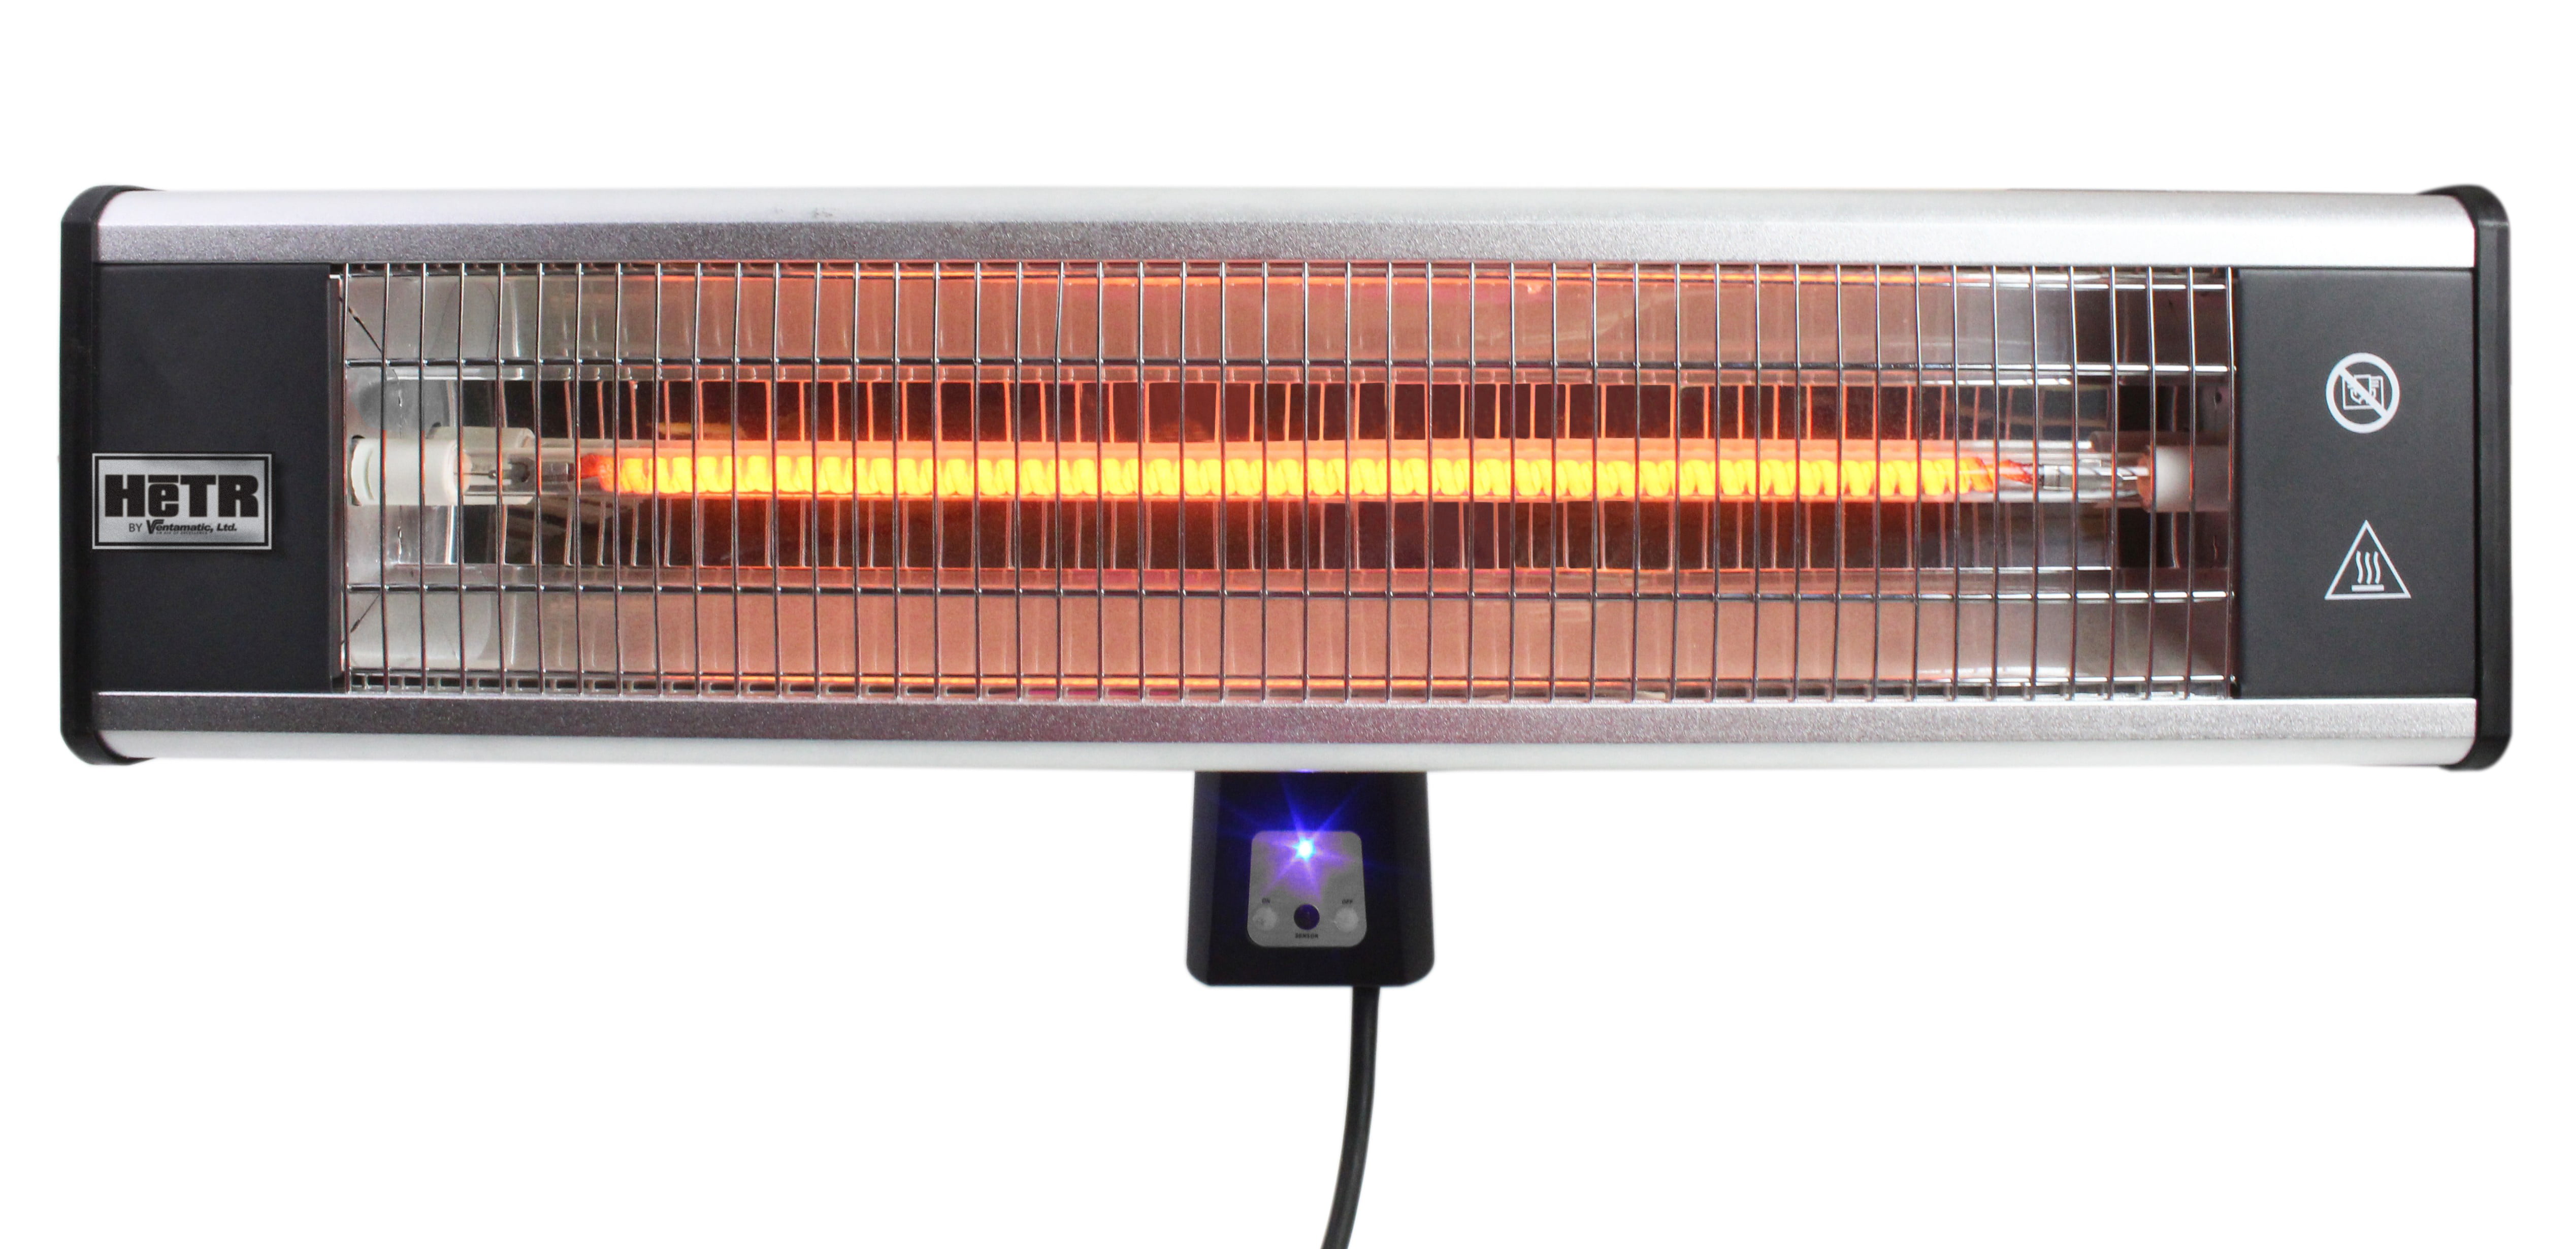 Maxx Air HeTR Outdoor Rated Wall Mount Infrared Heater with Remote 1500 Watts